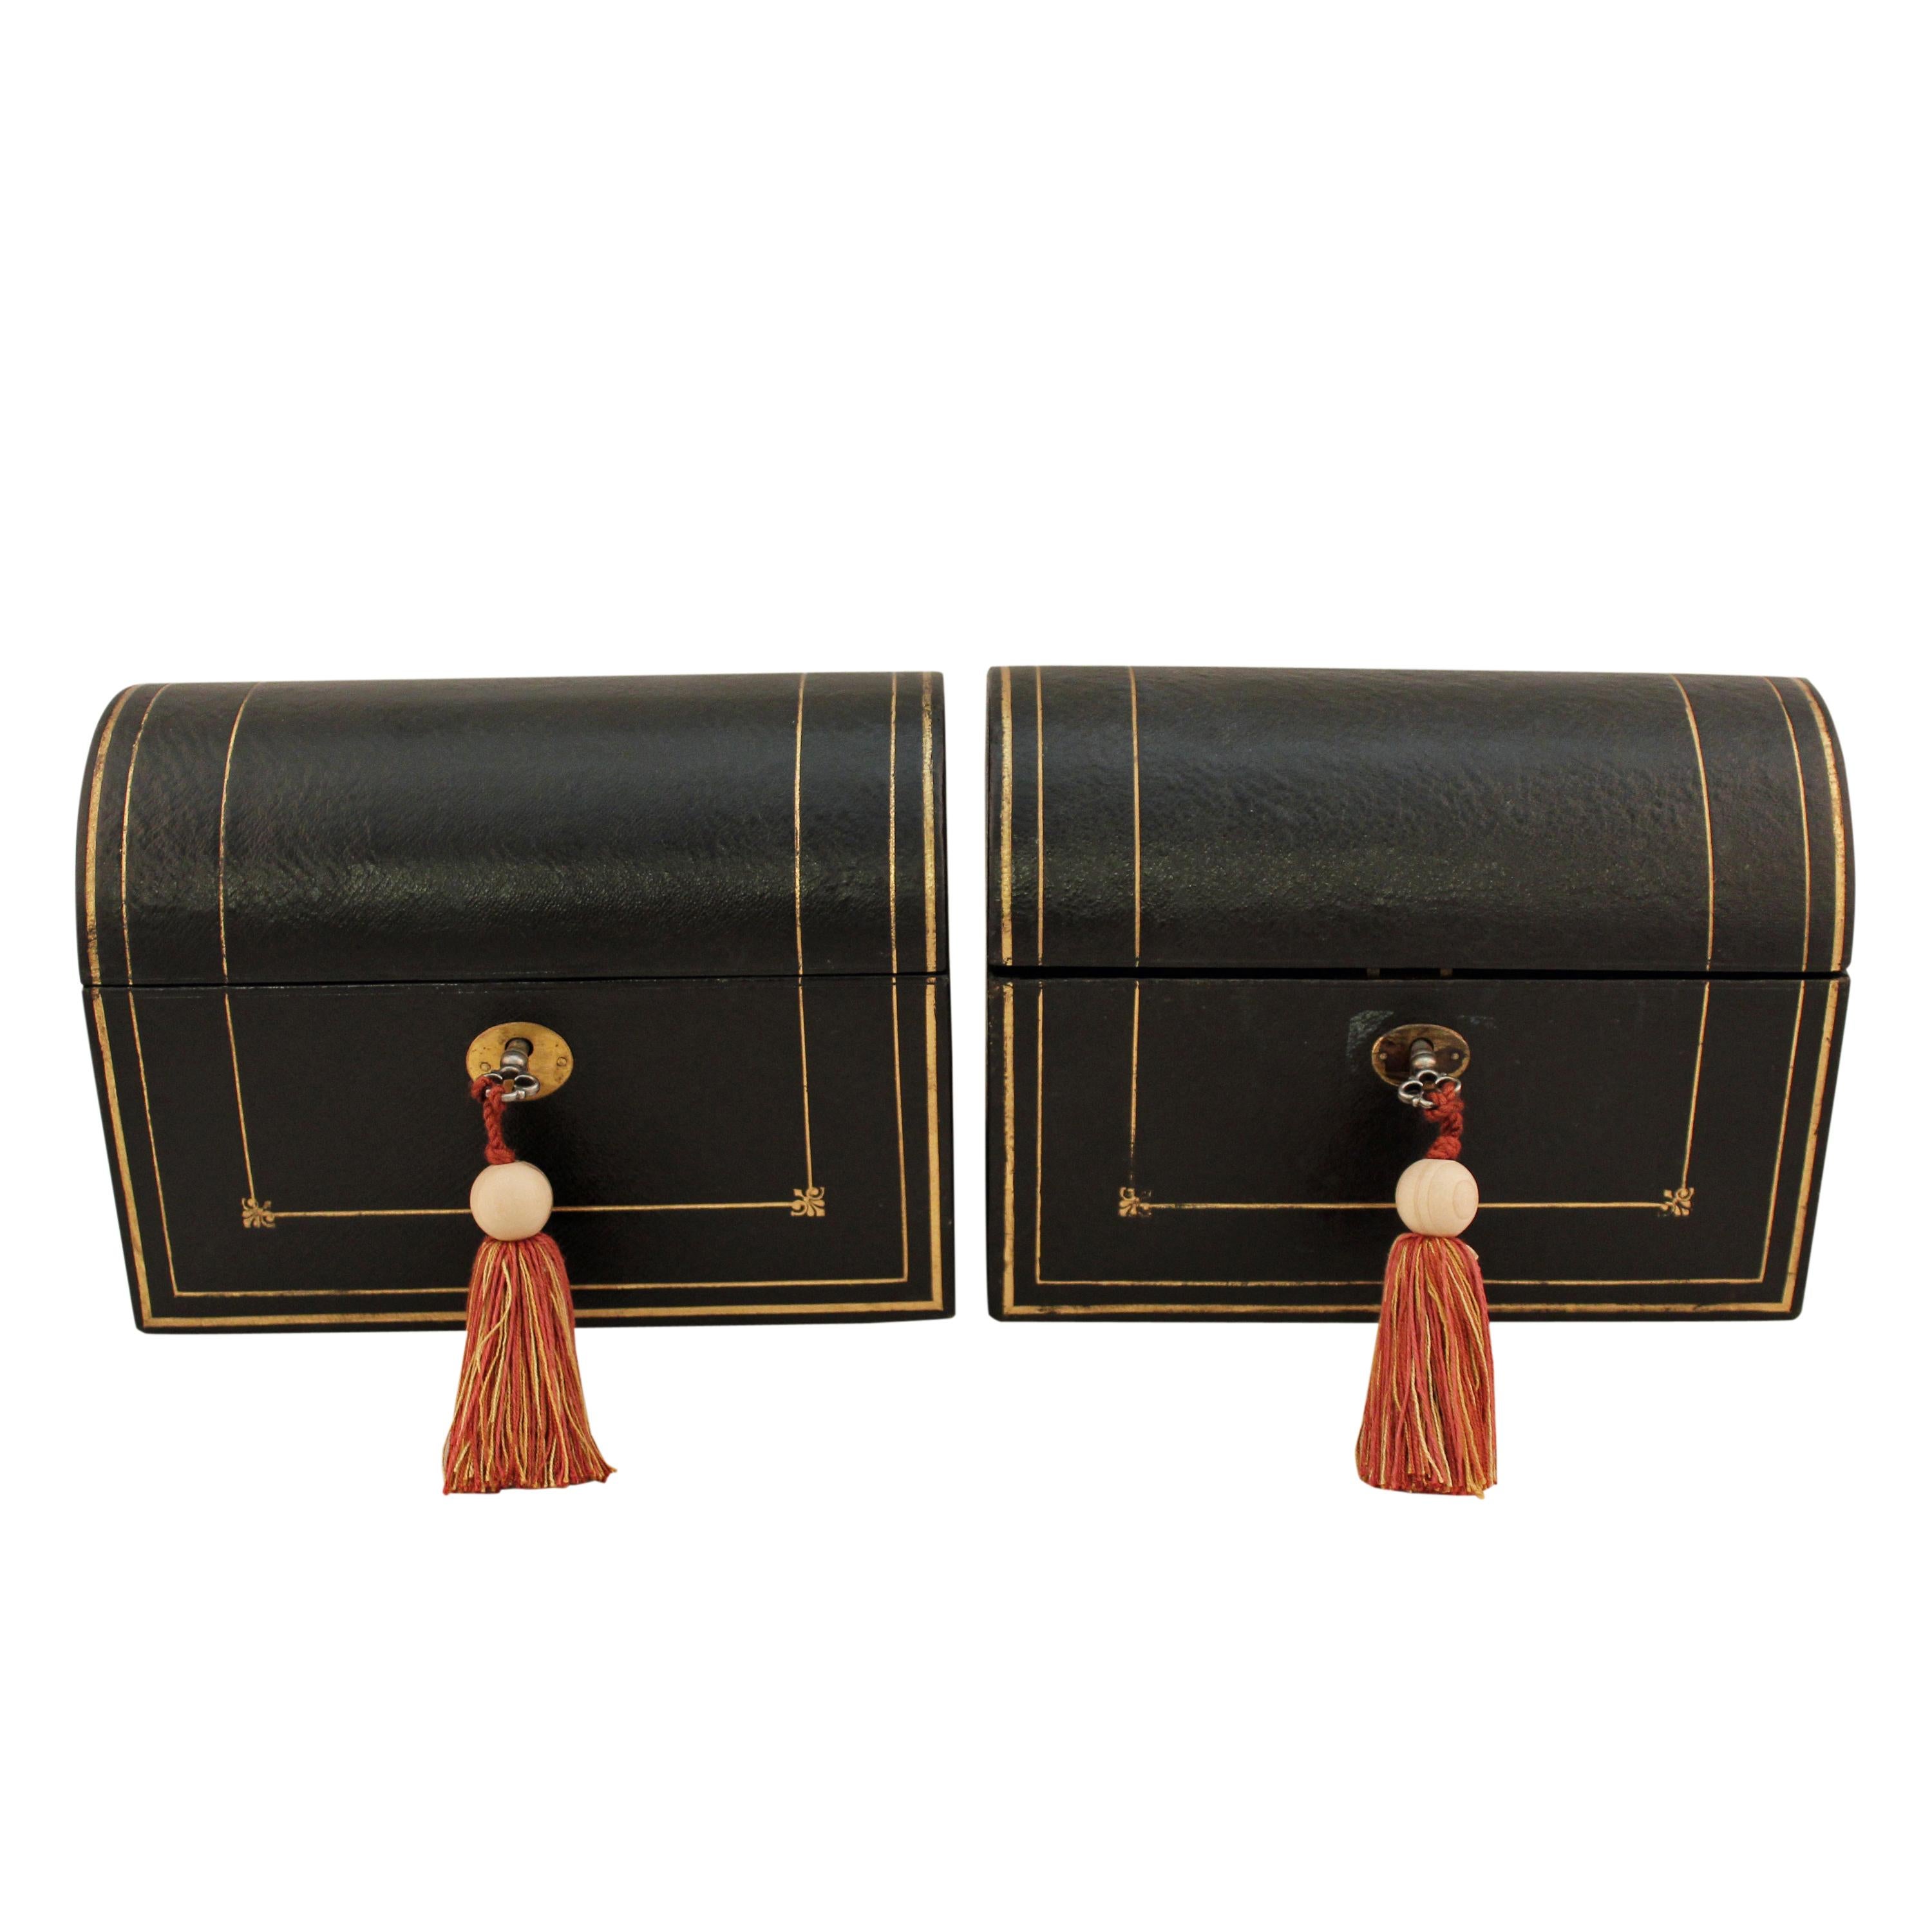 Pair of dome top stationery boxes


A pair of late 19th century Victorian dome top stationery boxes.

The wooden boxes are covered in black leather which is decorated with gilt tooling.

The lids hinge open to the compartmentalised storage